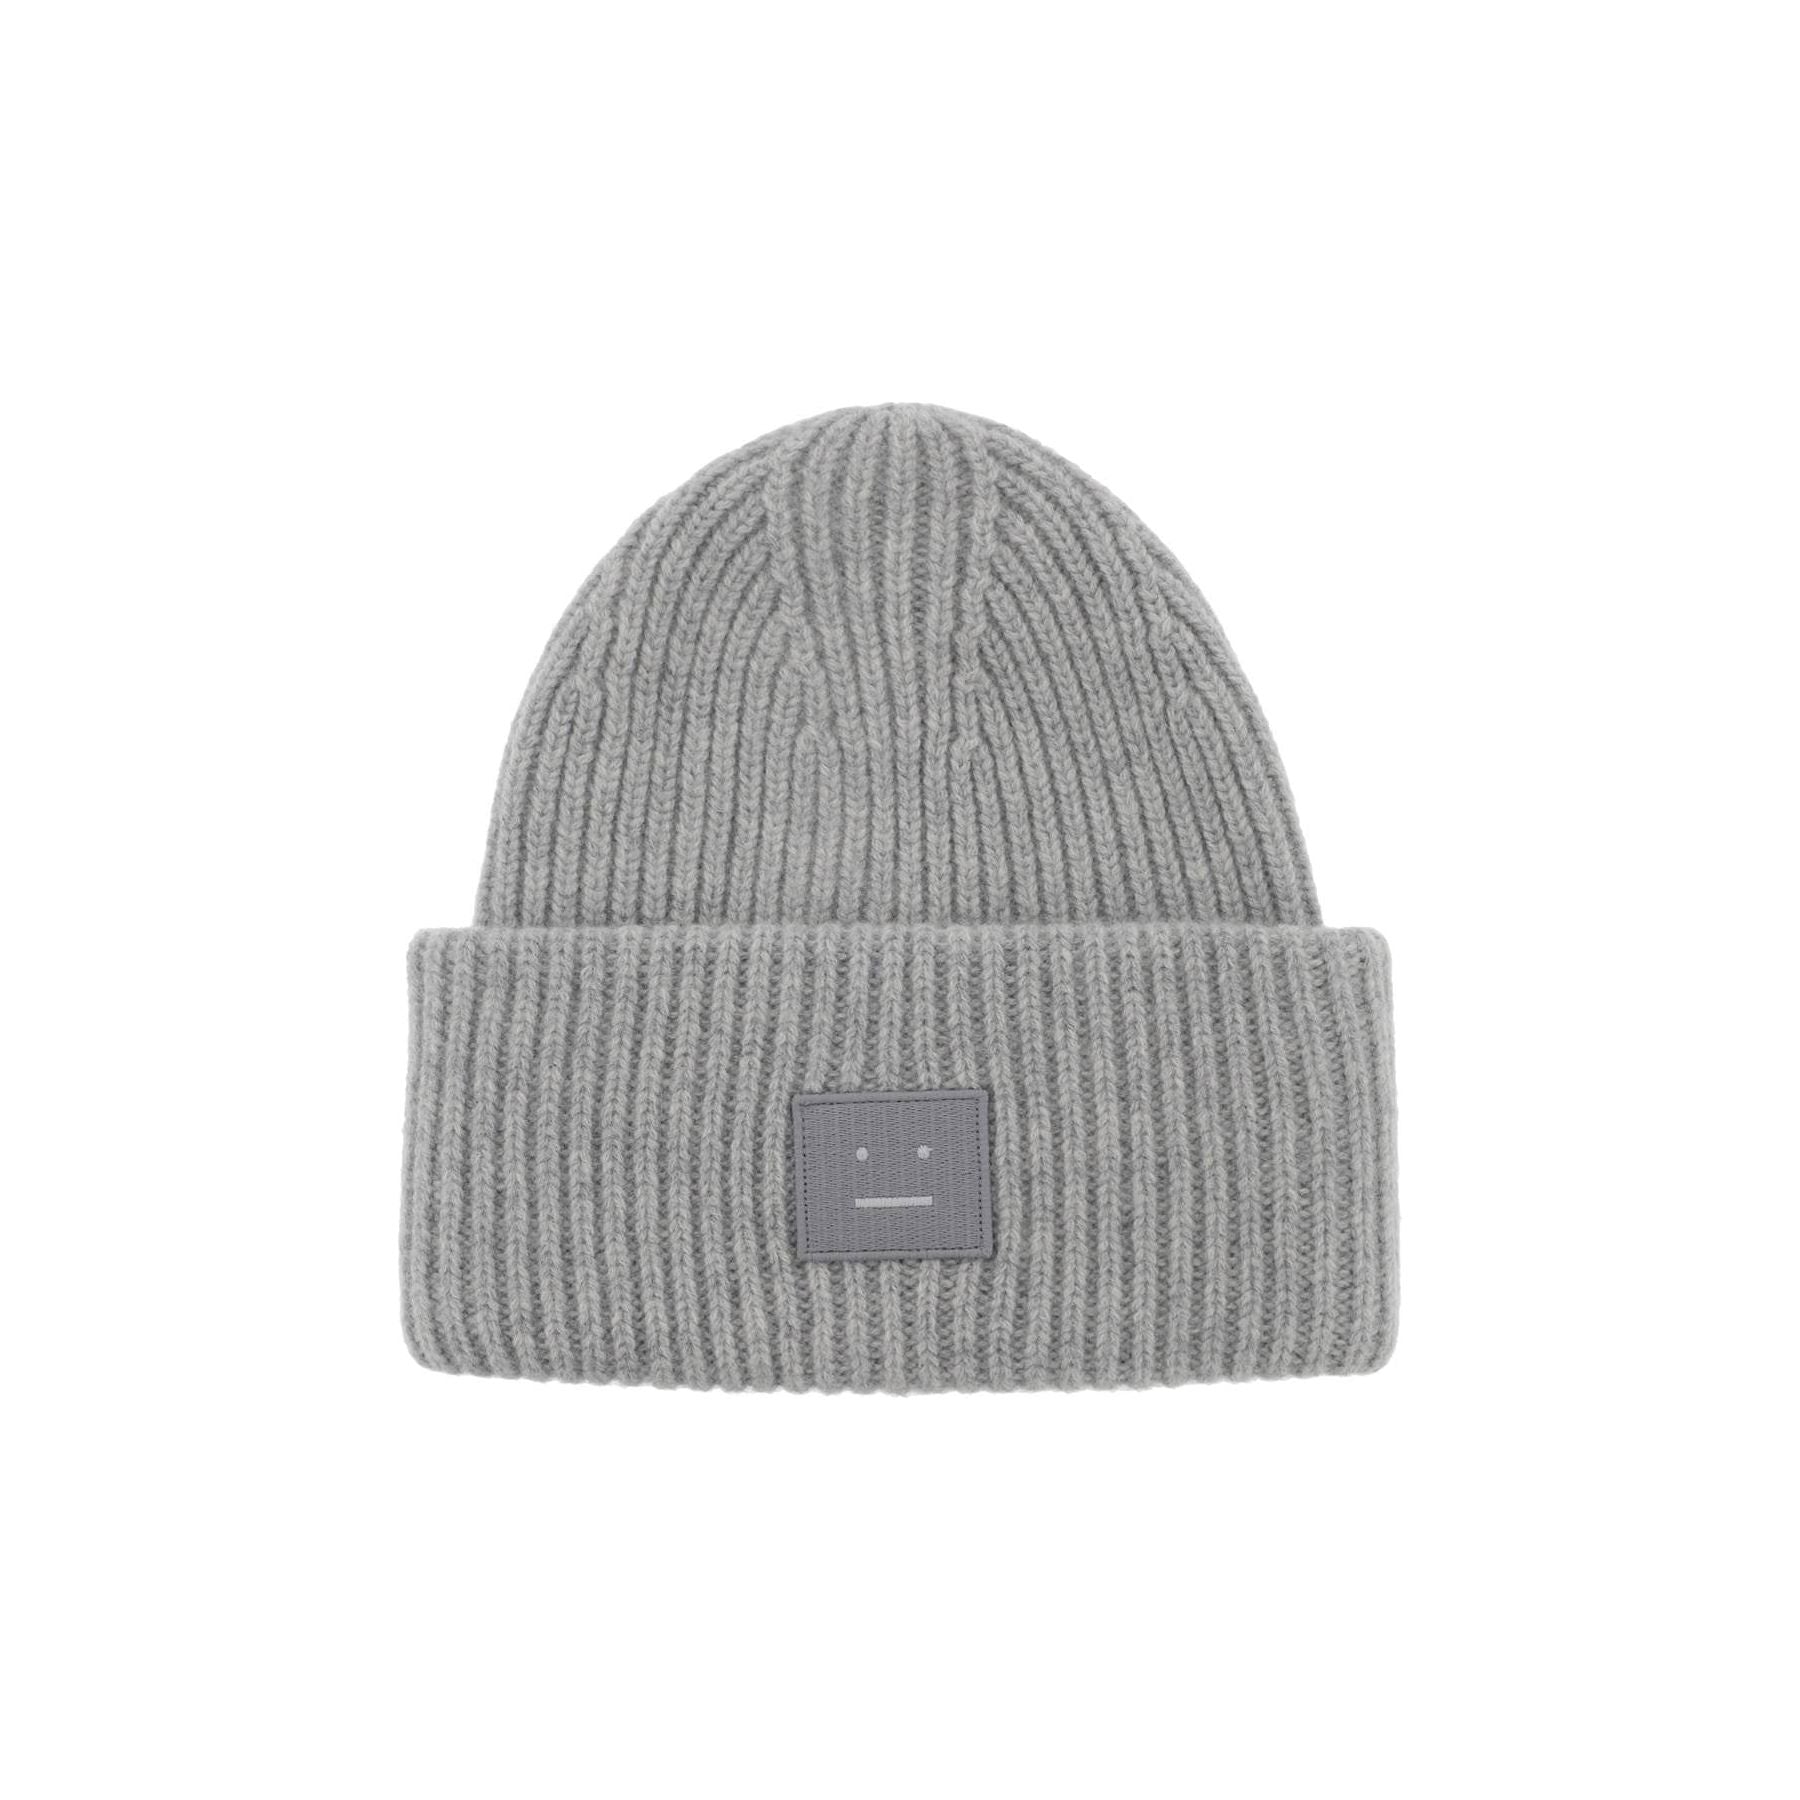 Large Face Patch Wool Knit Beanie Hat